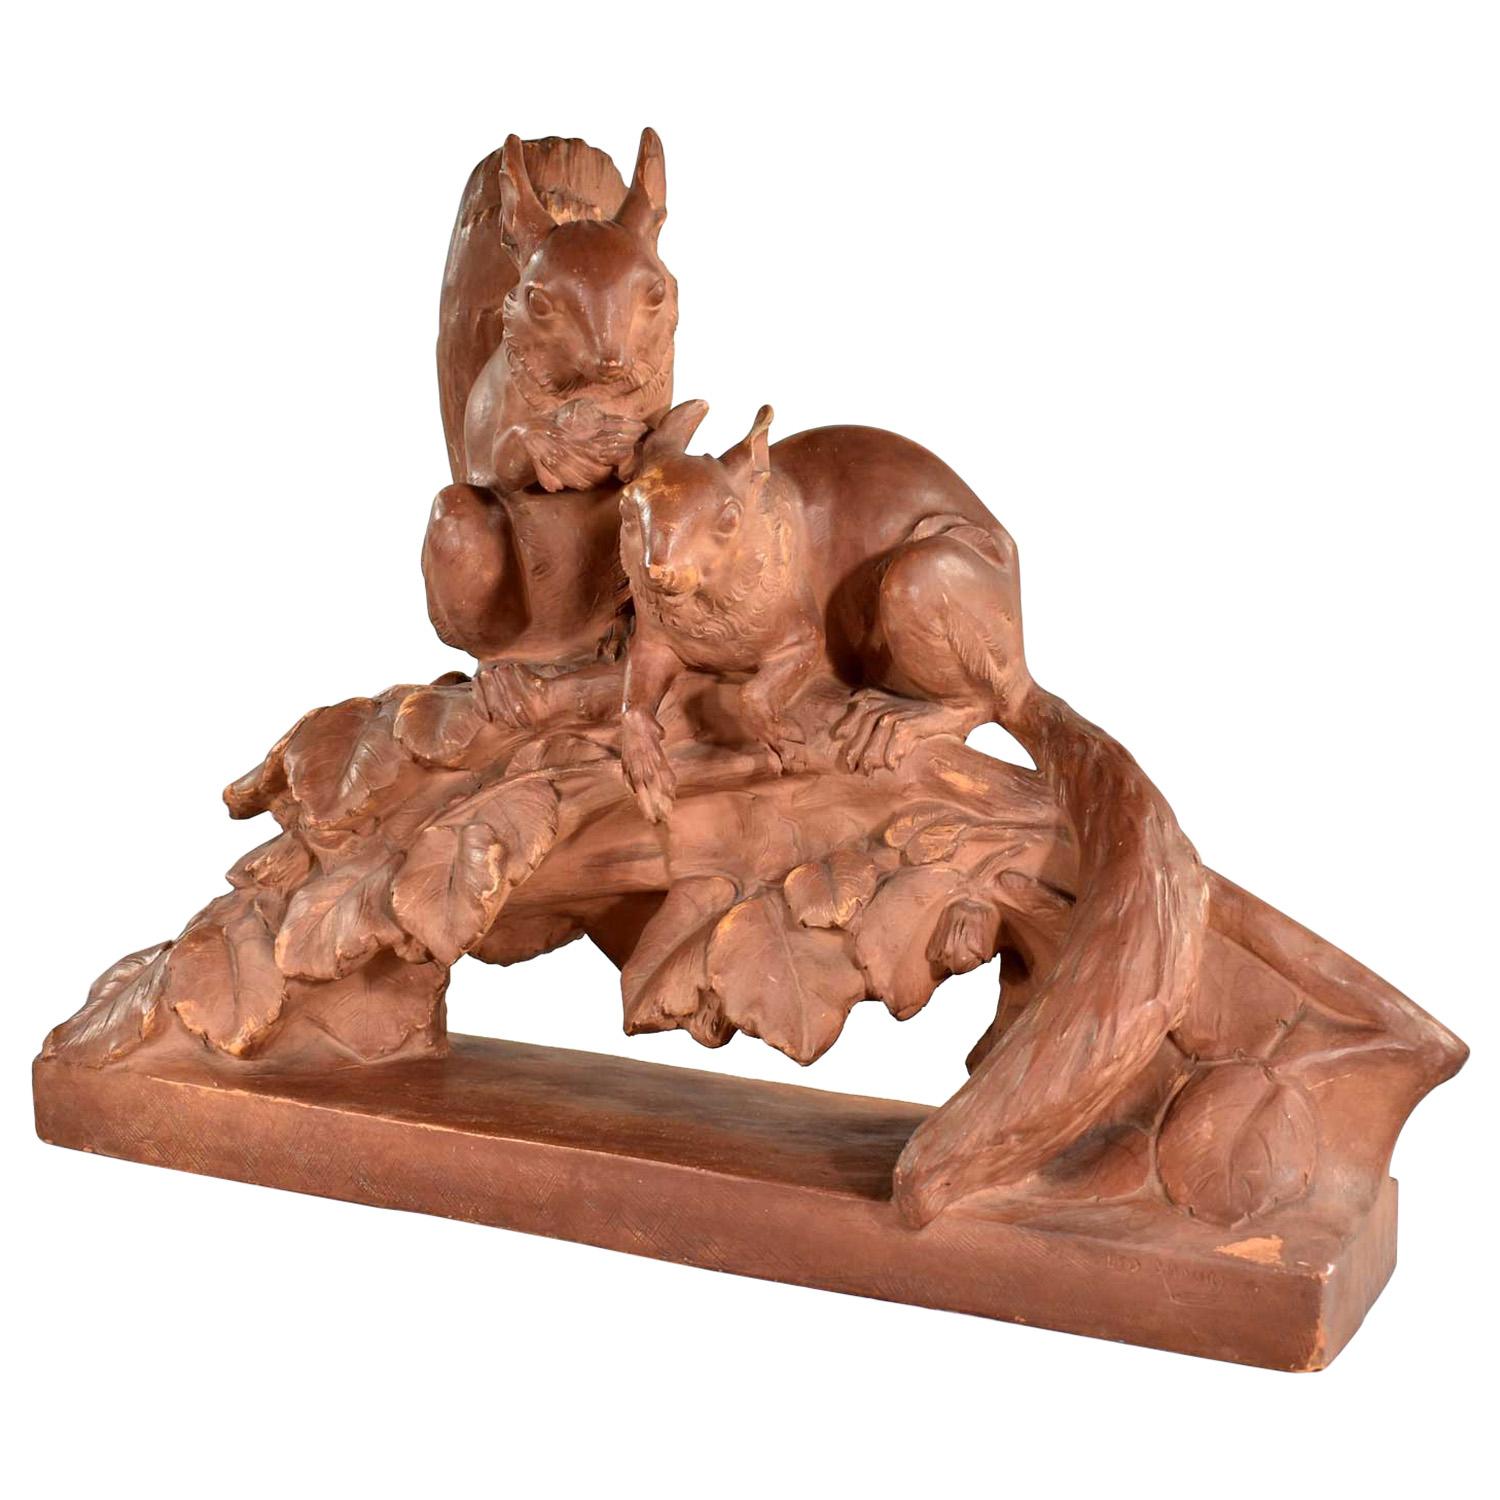 Terracotta Life-Size Squirrel Sculpture by Leo Amaury & Stamped R D’Arly France For Sale